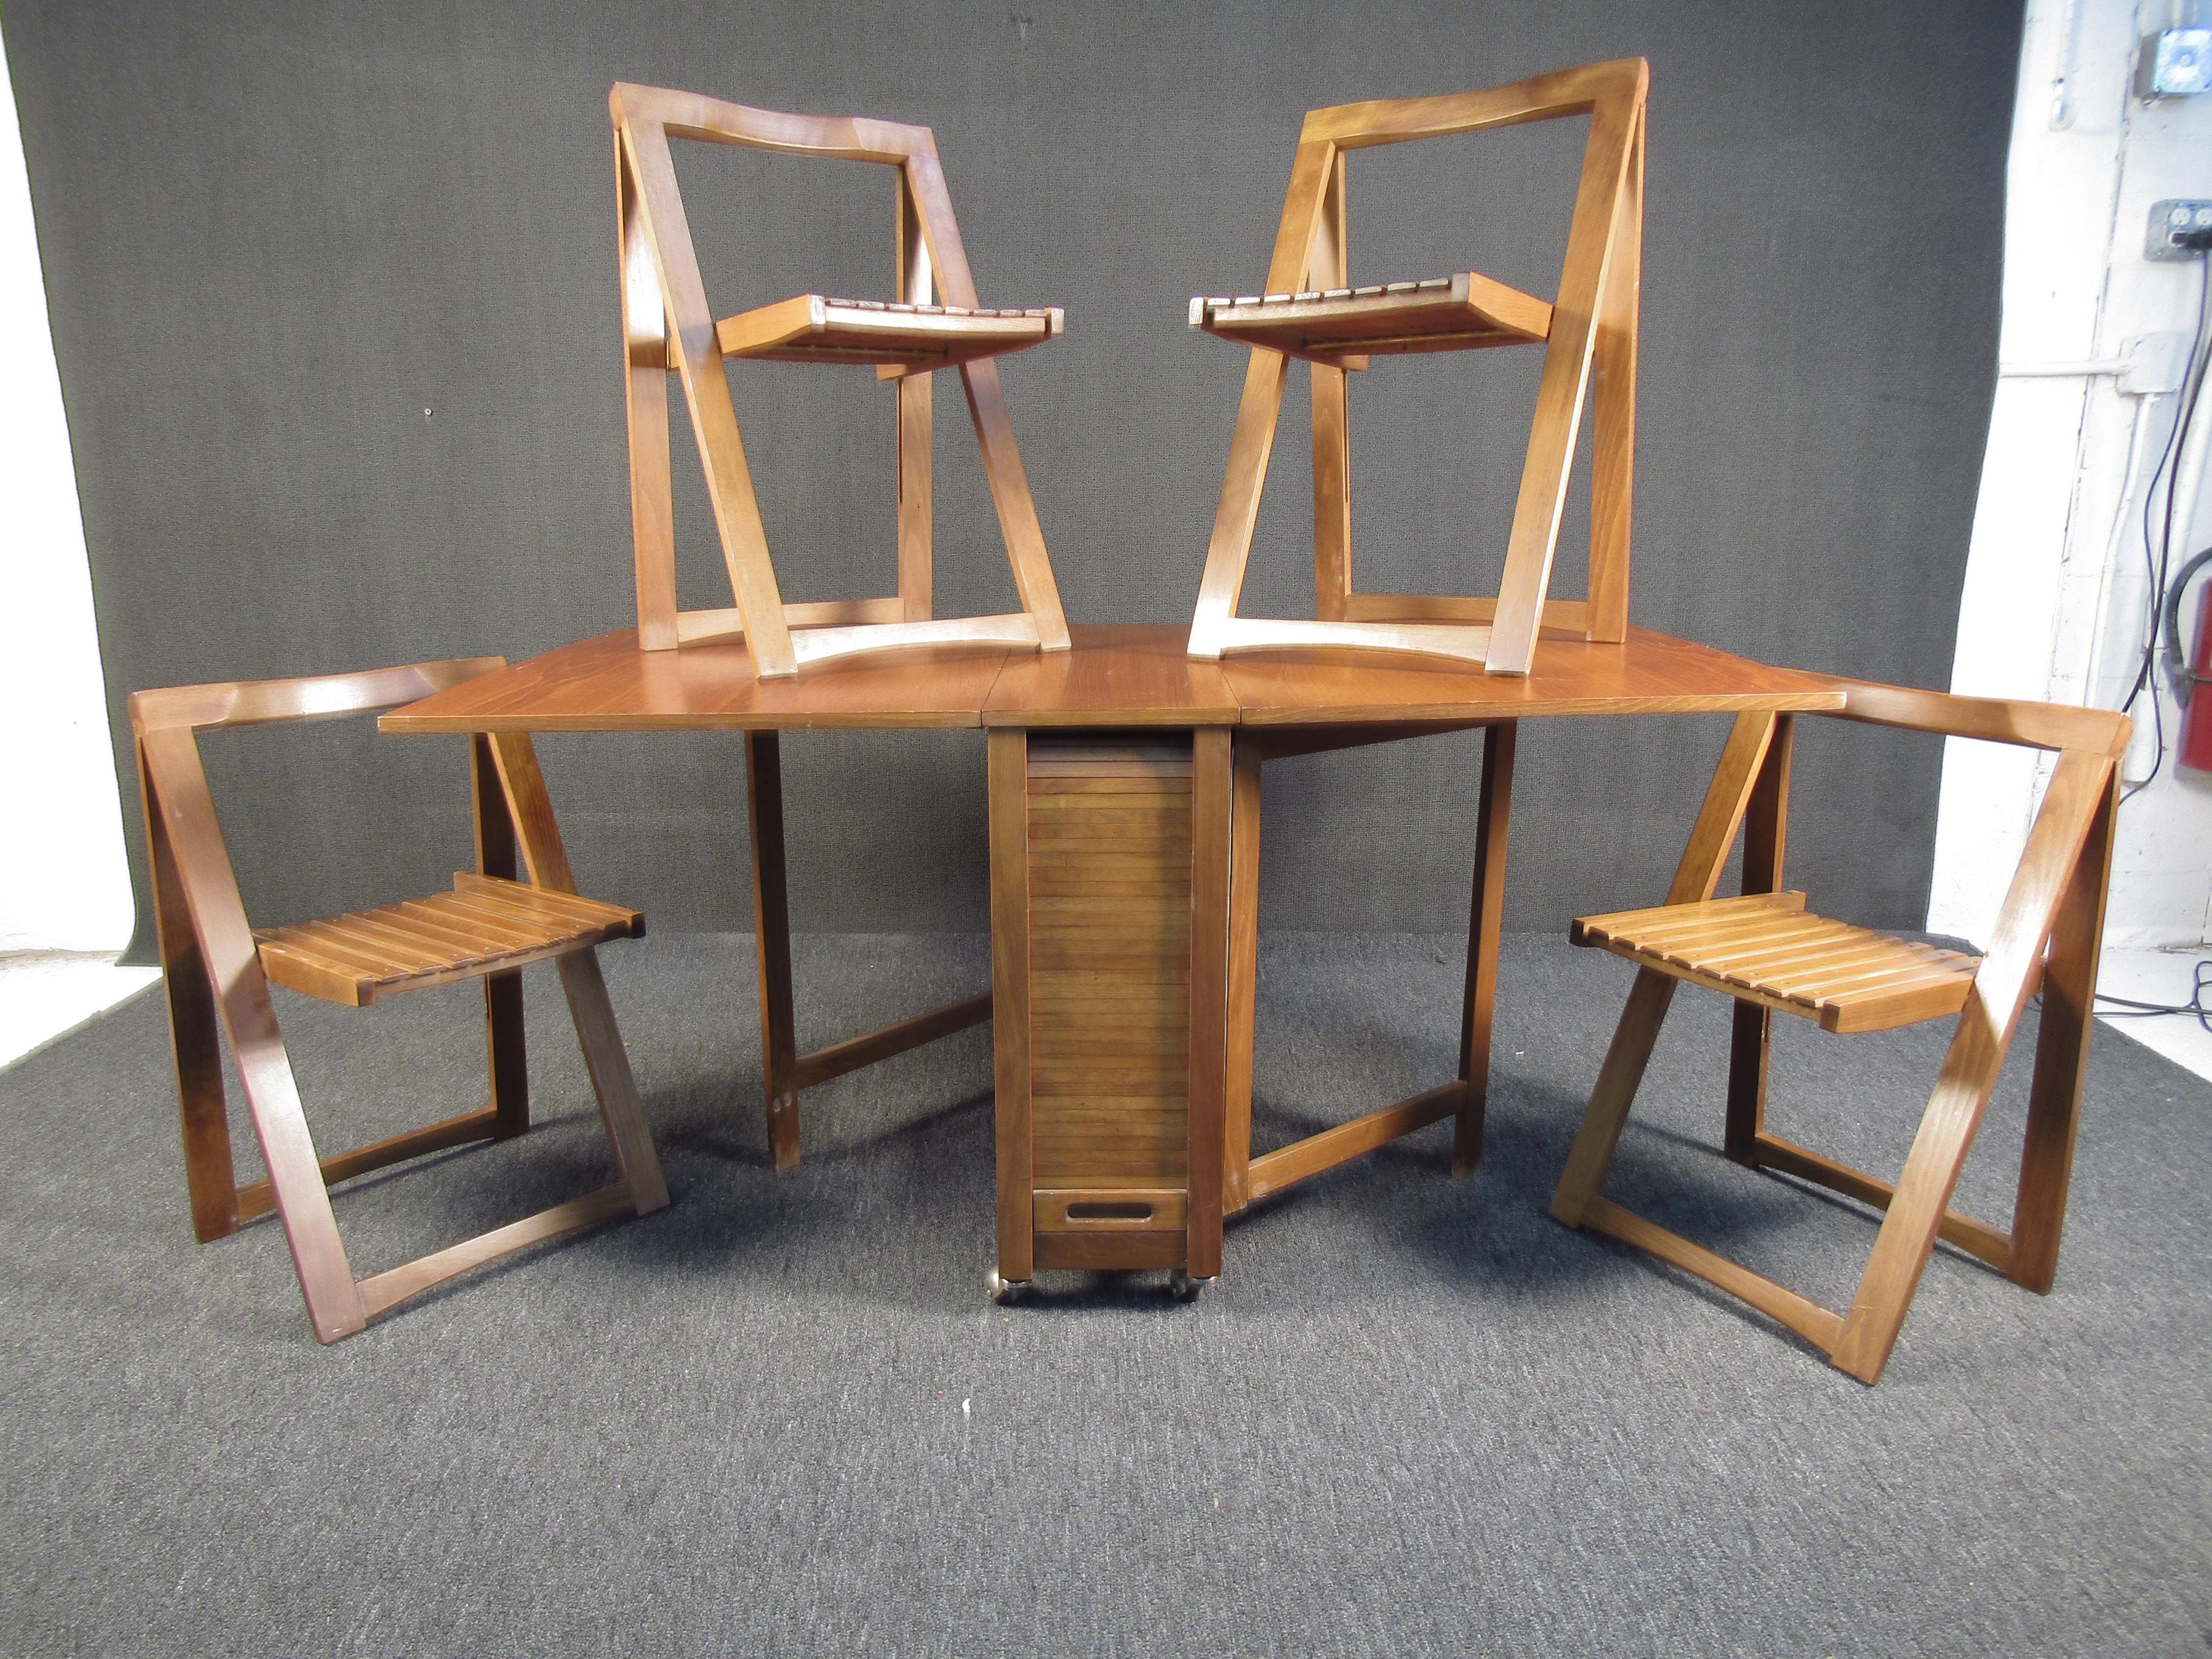 This beautiful apartment-style drop-leaf table comes with a set of four collapsable chairs that store underneath. With an impressive amount of table space for how compact this set stores it is both functional and beautiful. Please confirm the item